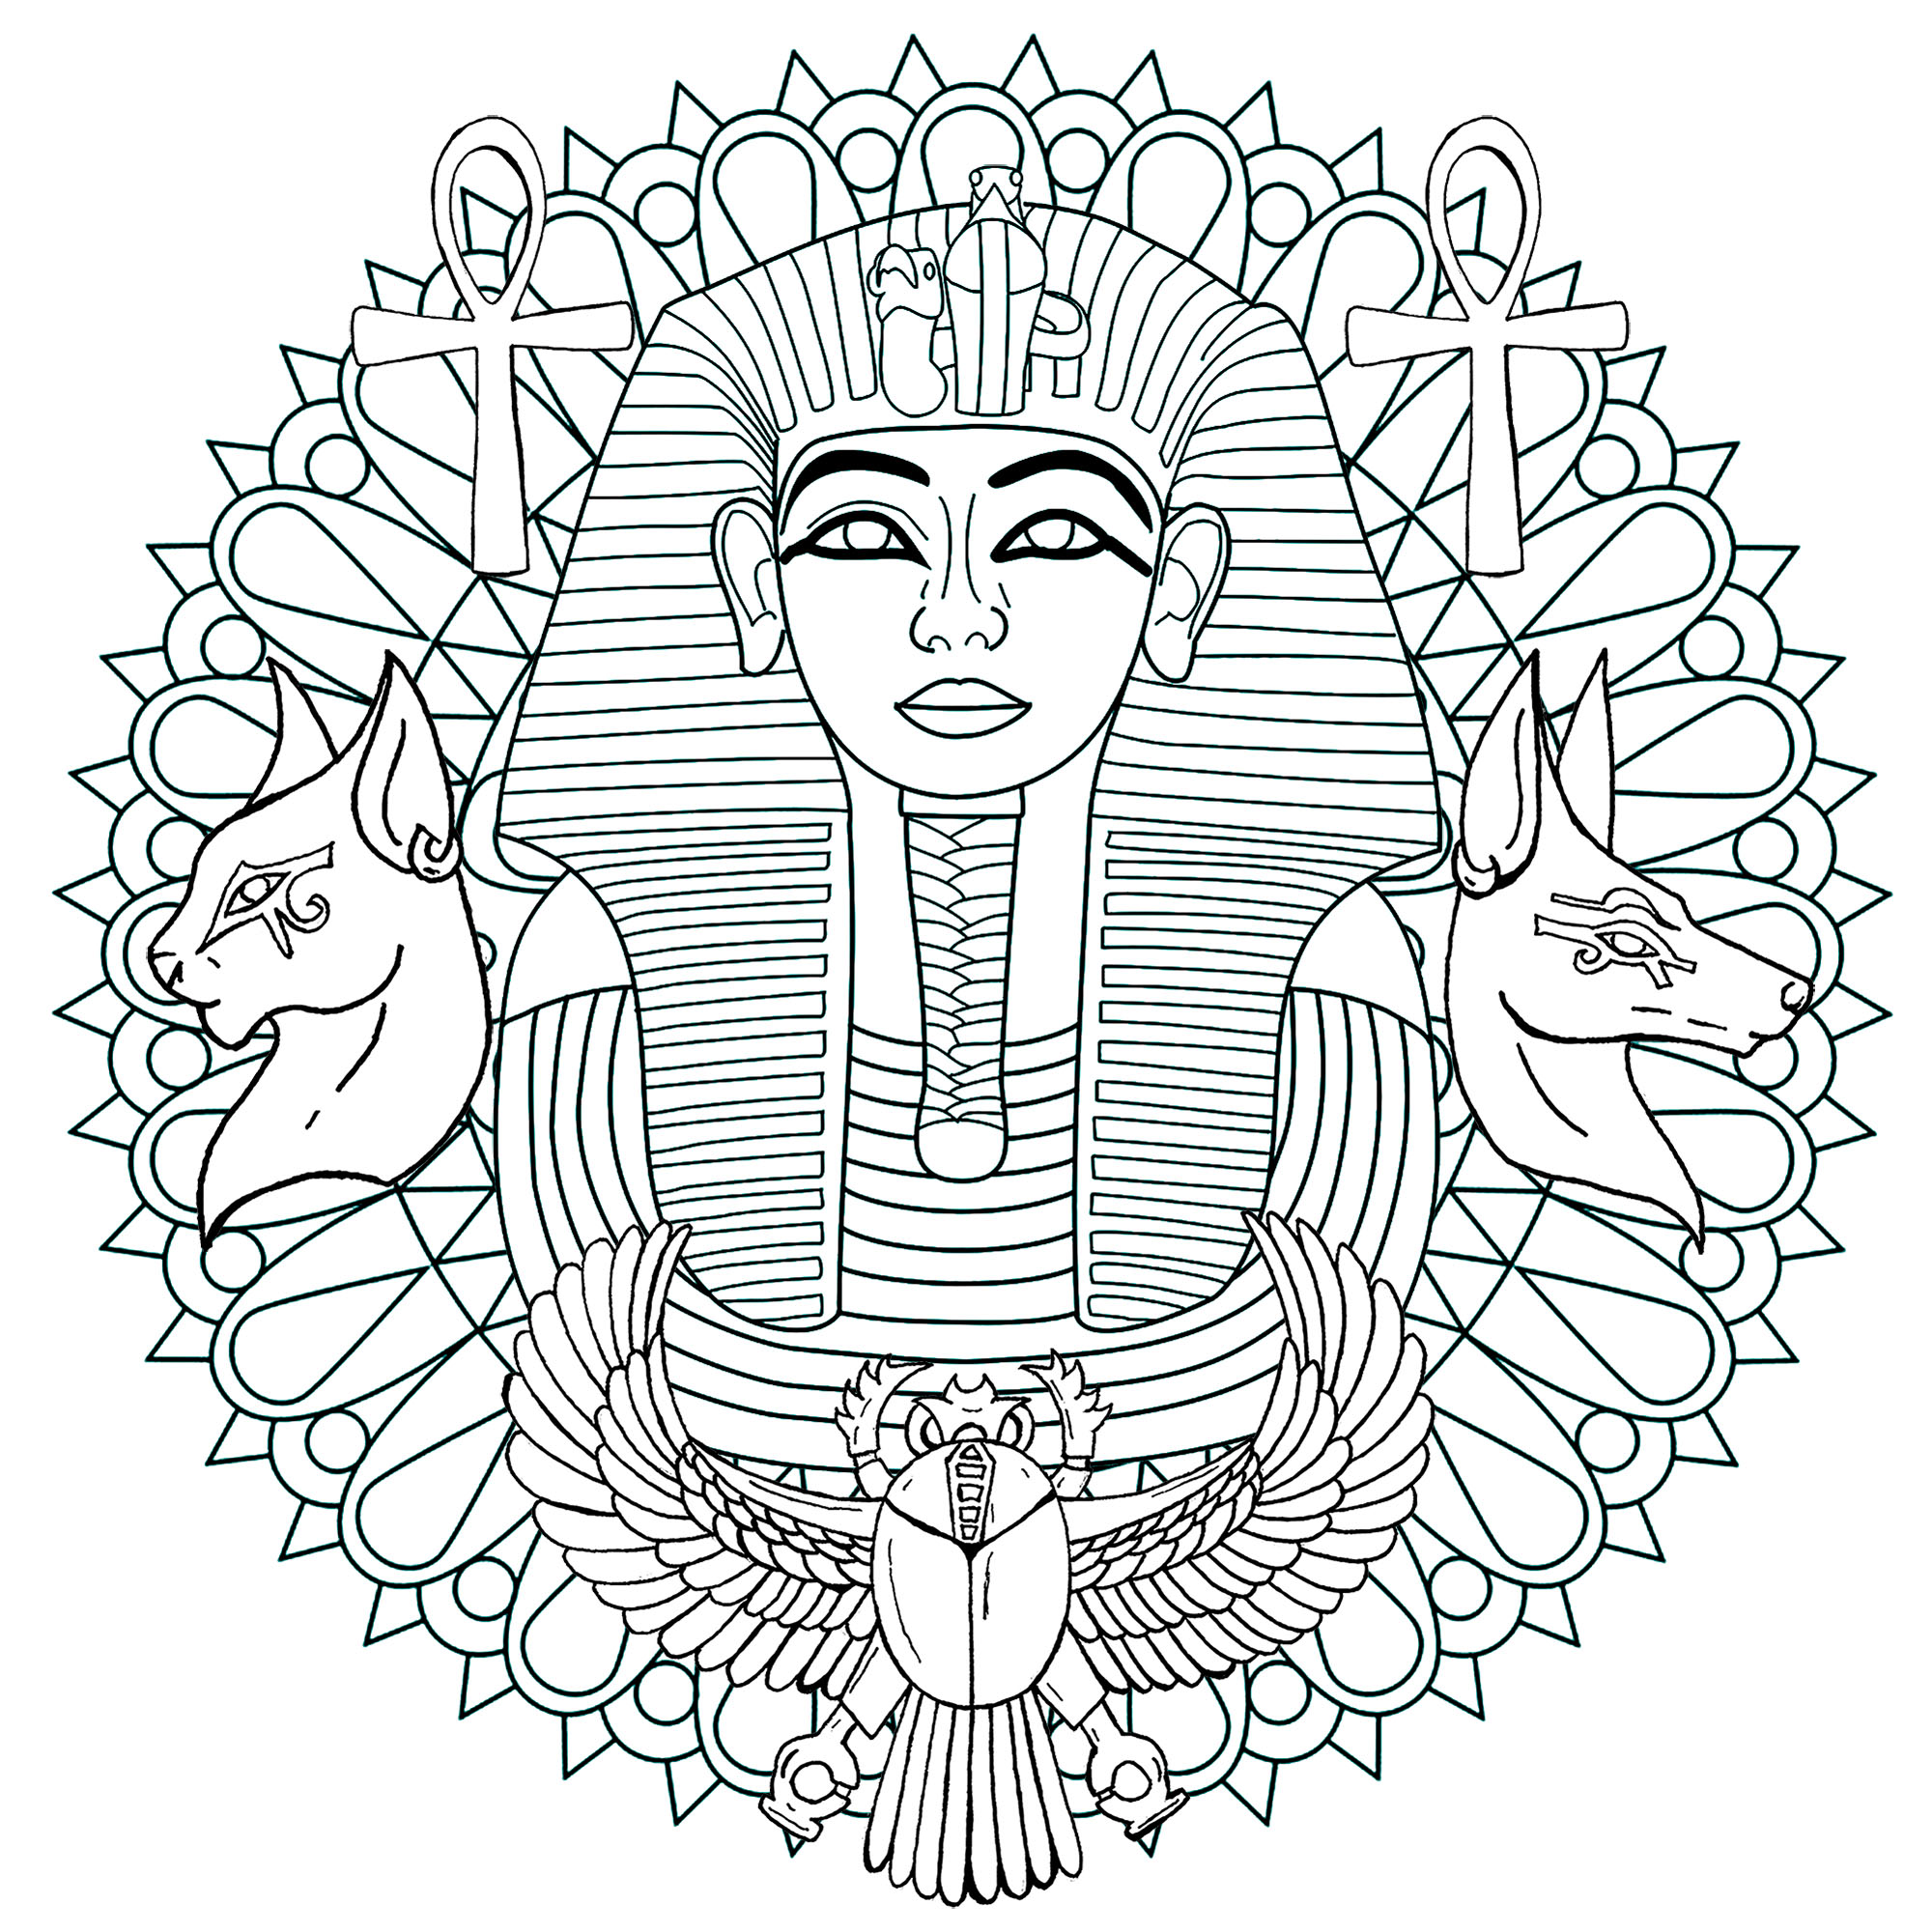 Color this Mandala with various symbols of Egypt, including the famous Mask of Tutankhamun. First version